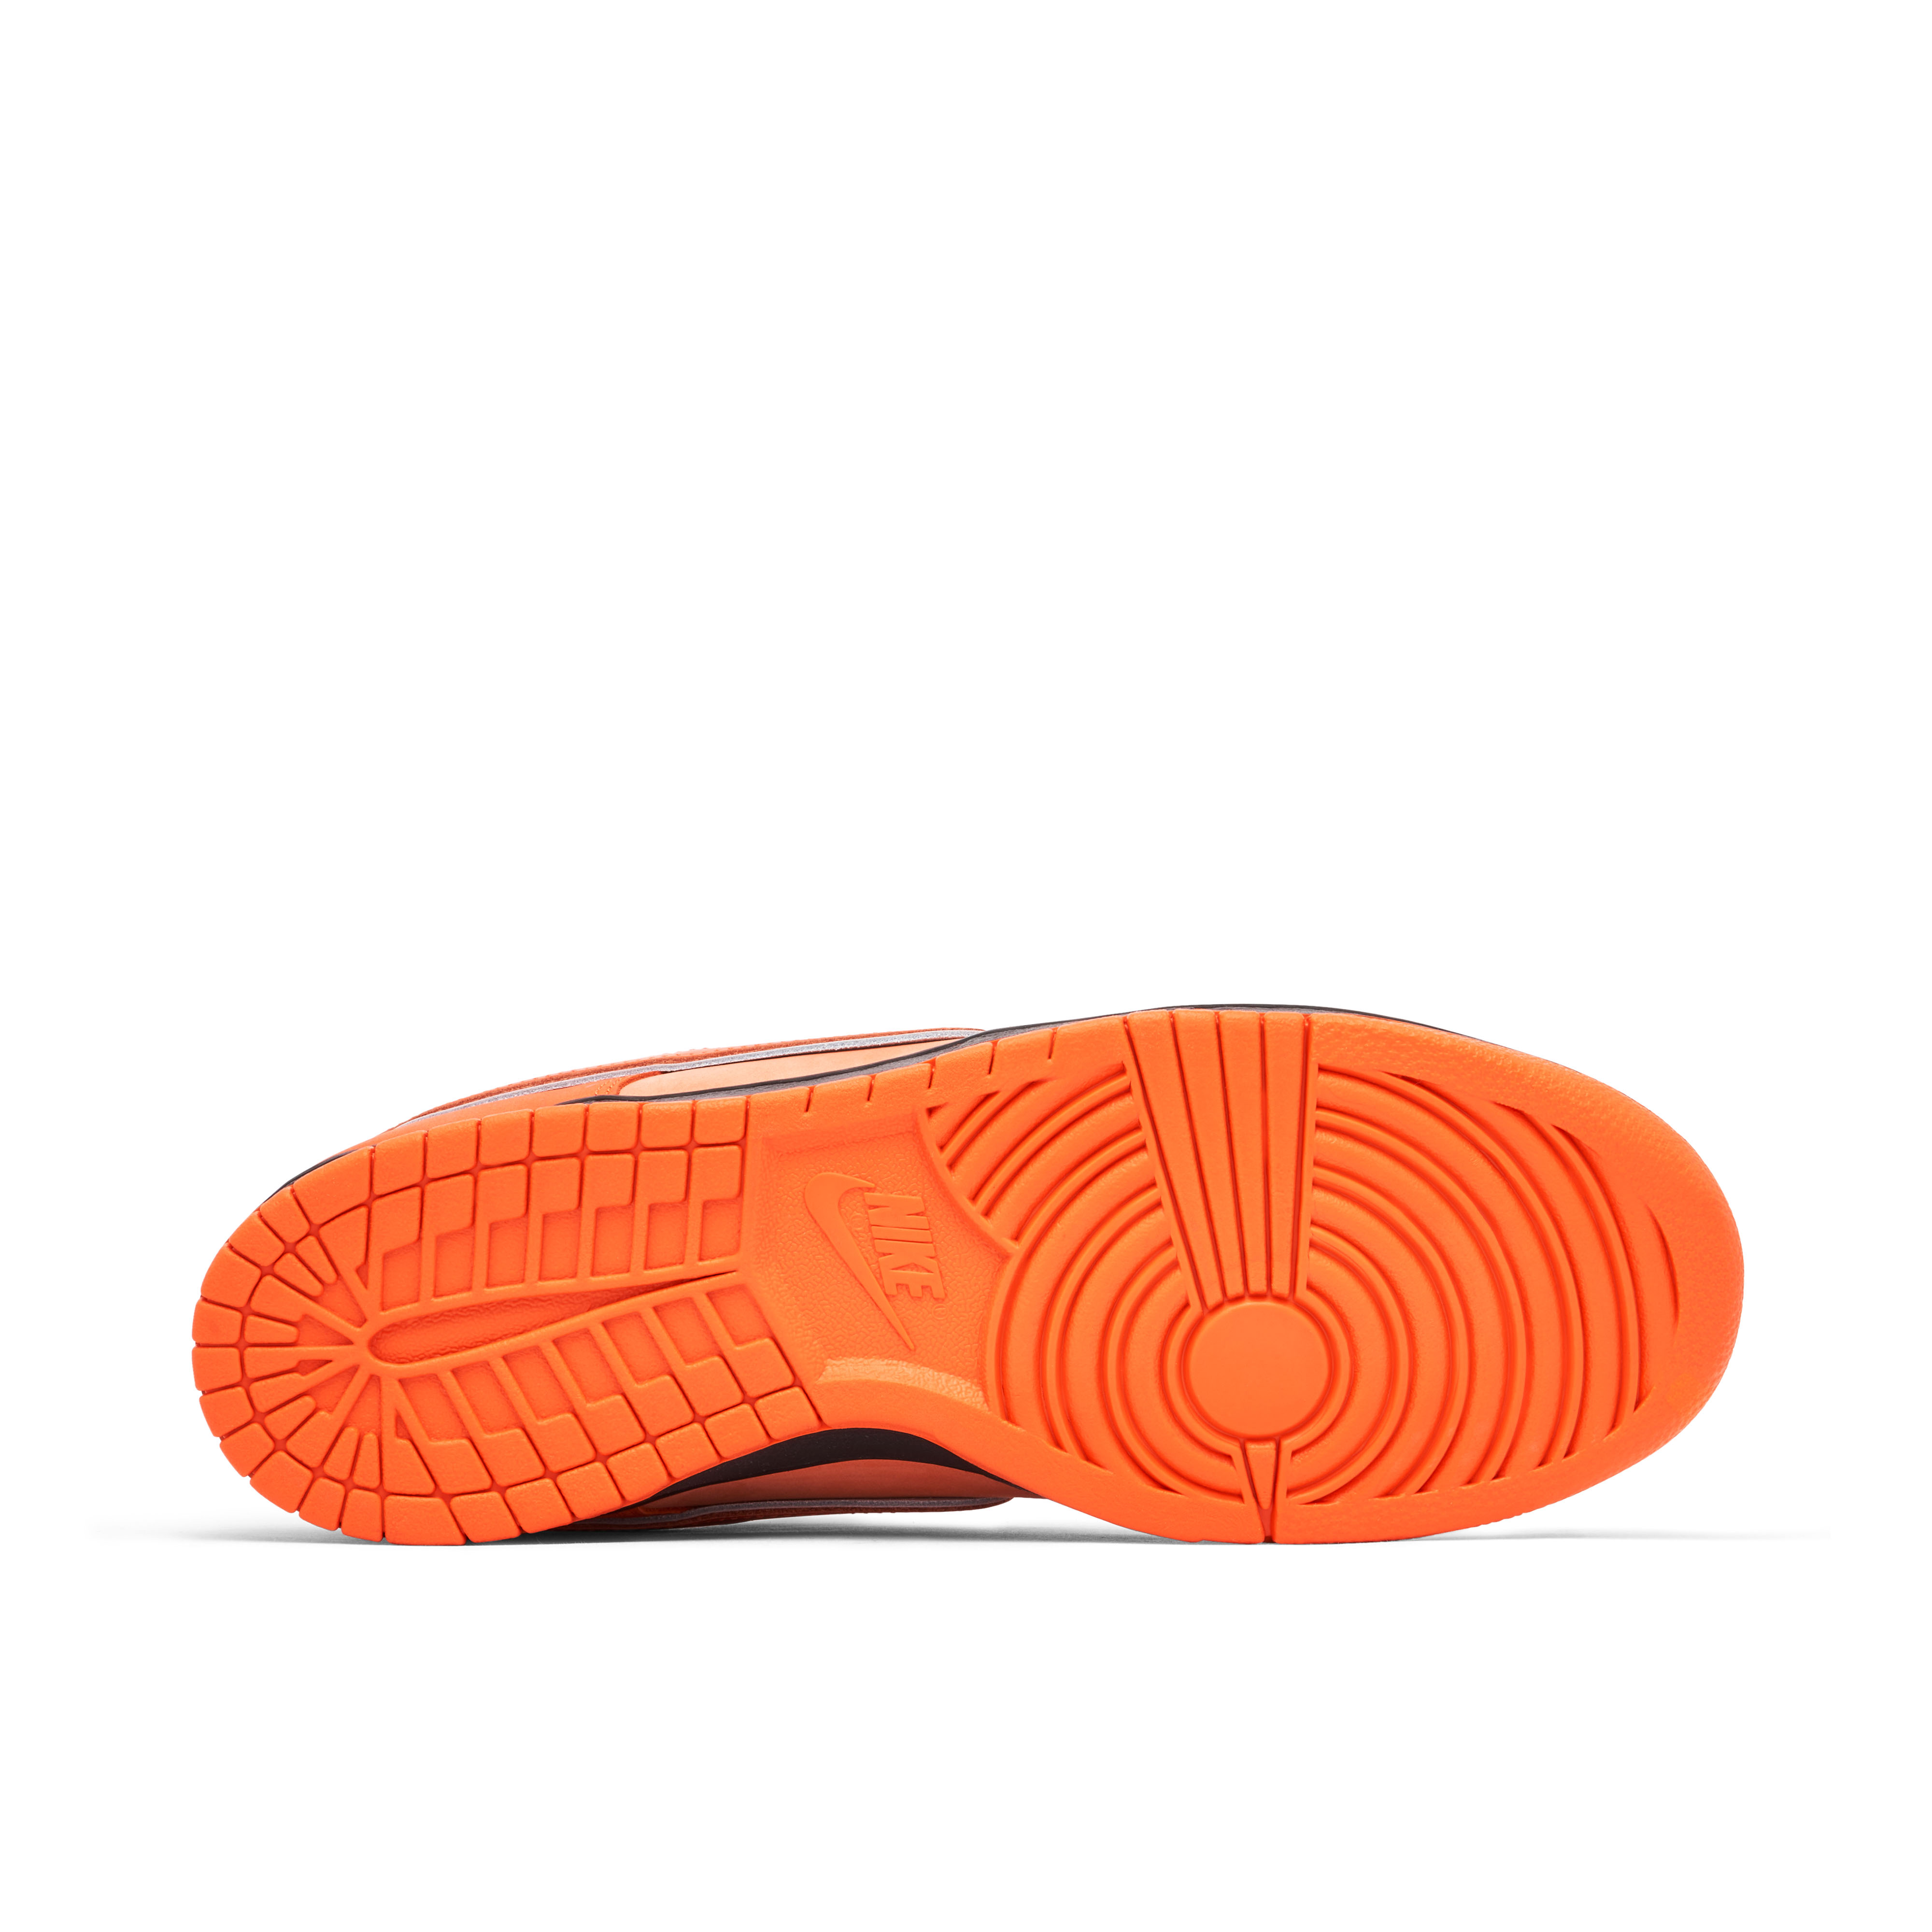 Nike SB Dunk Low x Concepts Orange Lobster | FD8776-800 | Laced